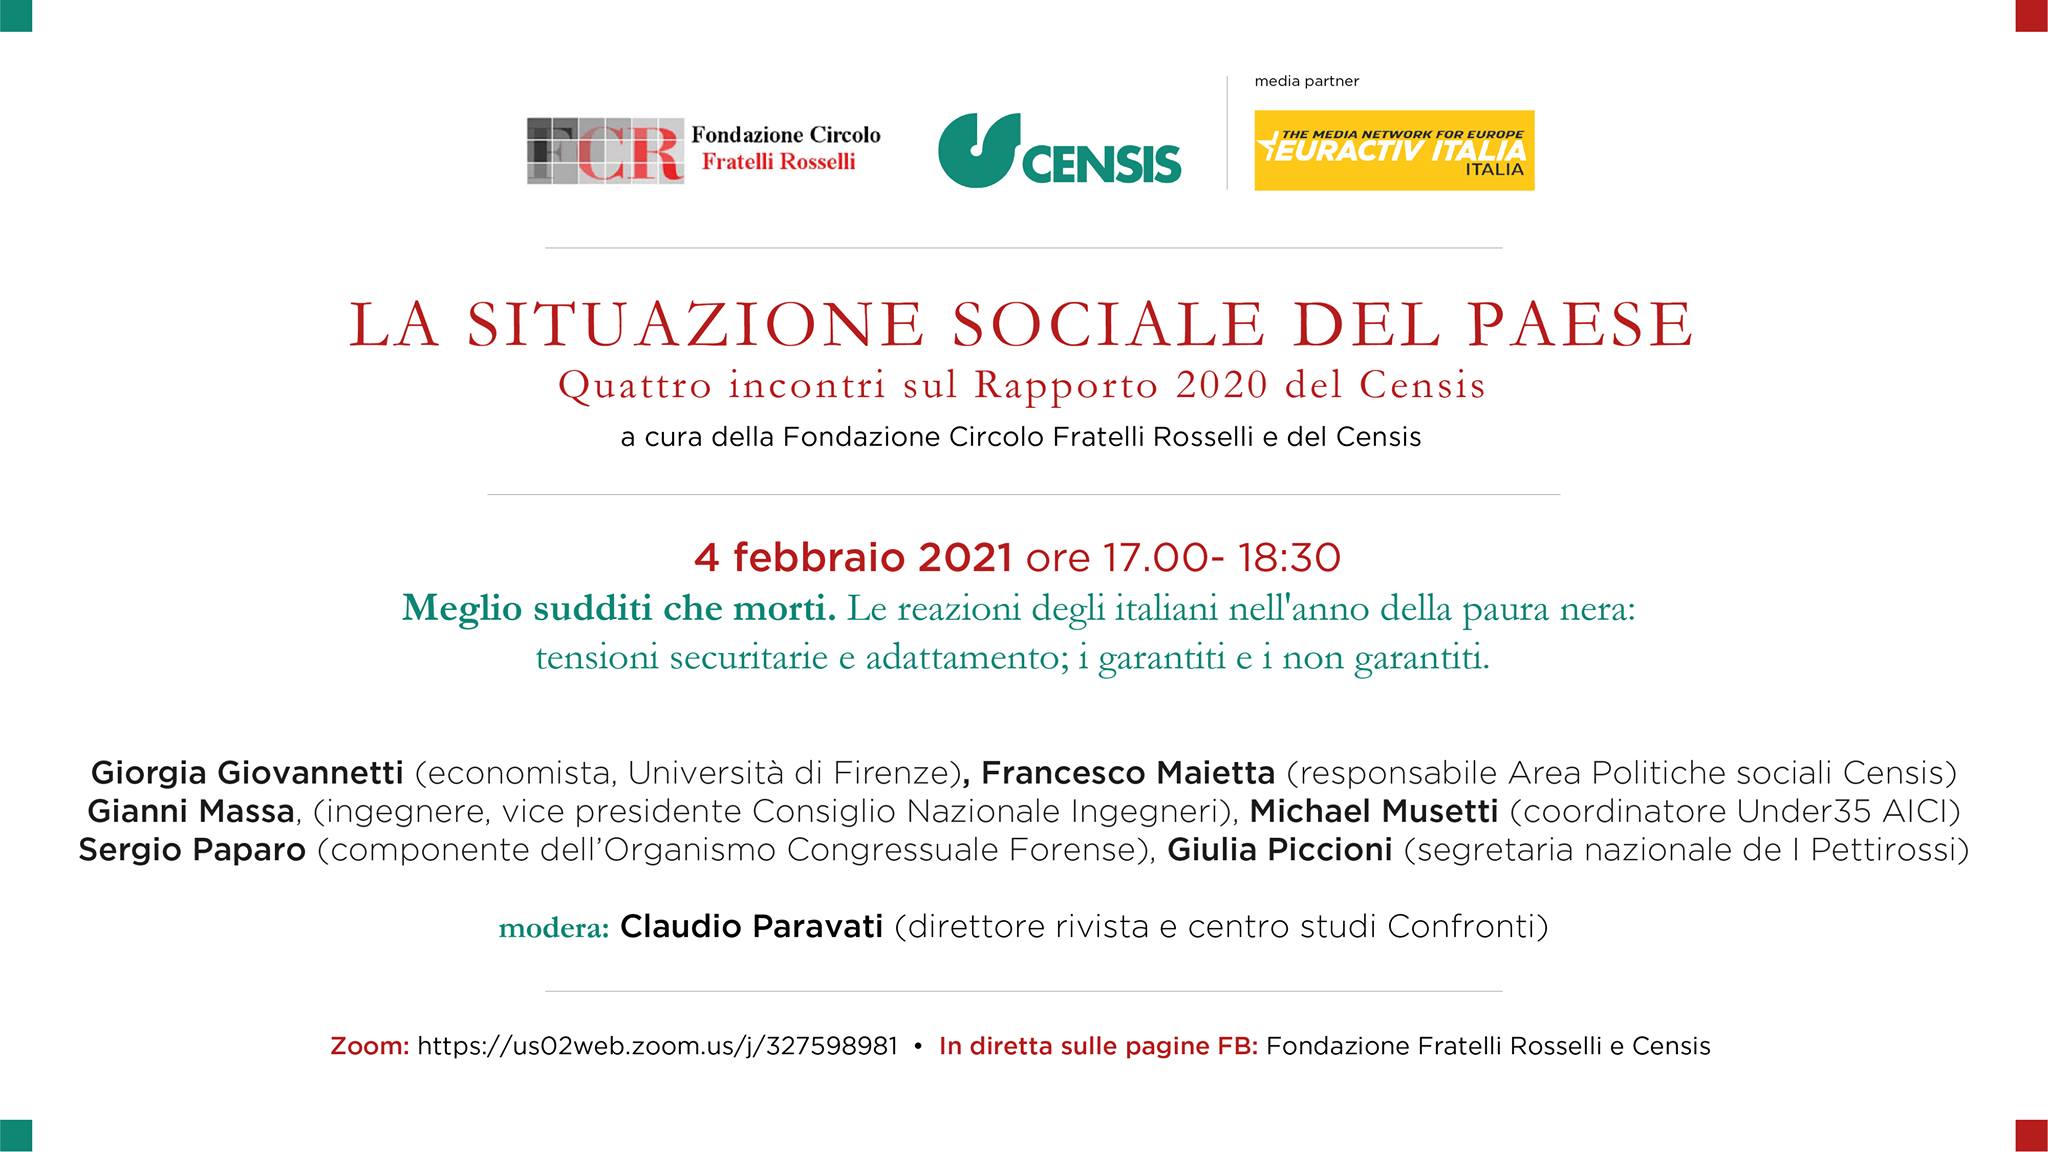 4.02.21situazionesocialepaese bf575